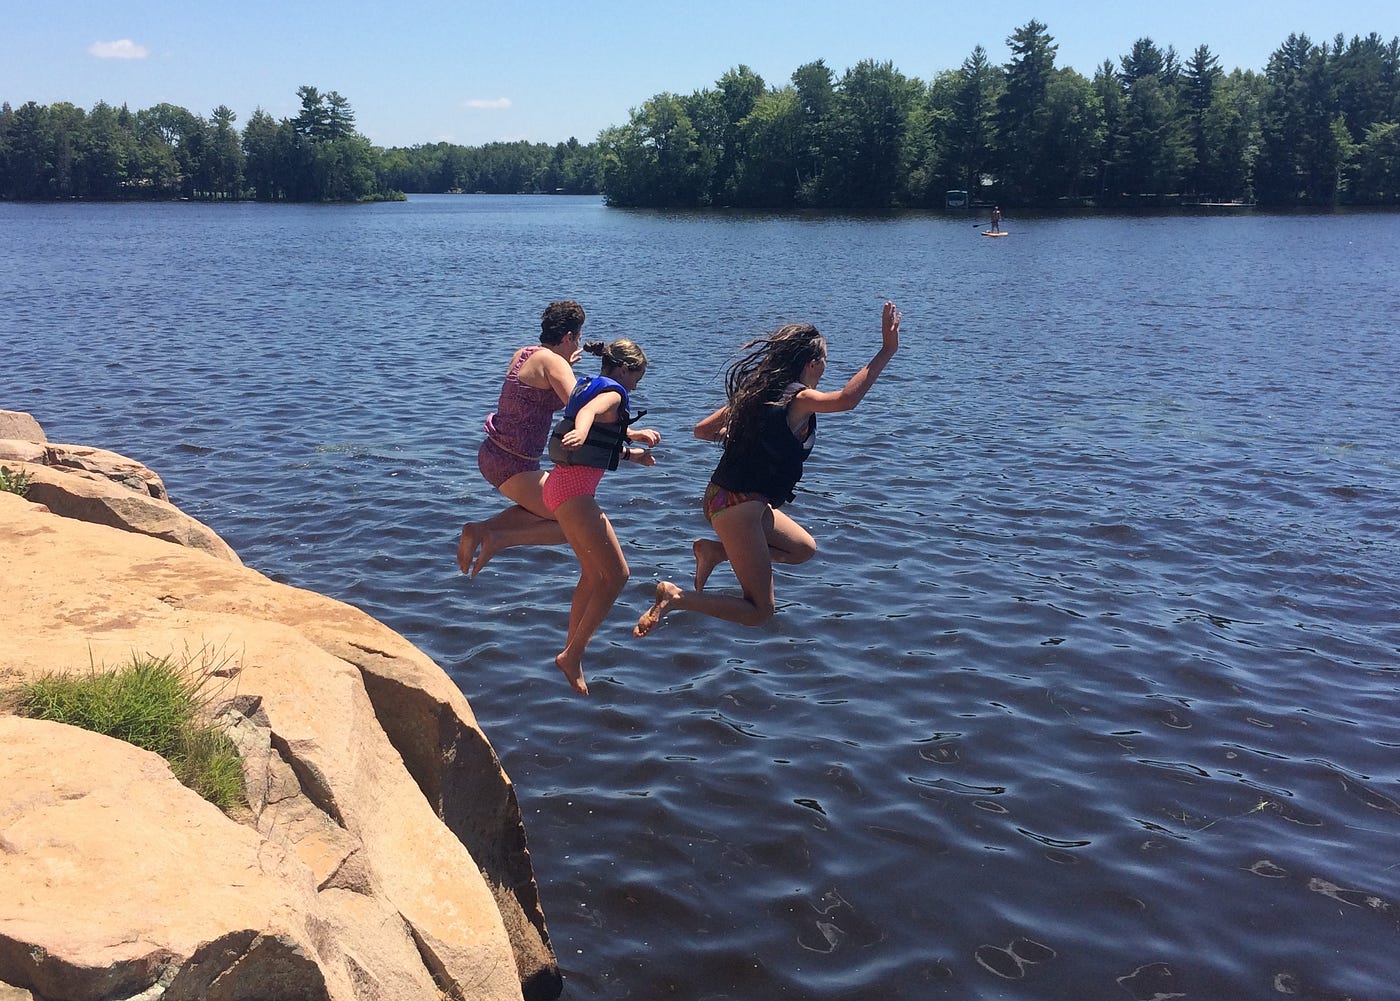 Three people in mid-air, jumping off a large rocky outcropping into a lake.